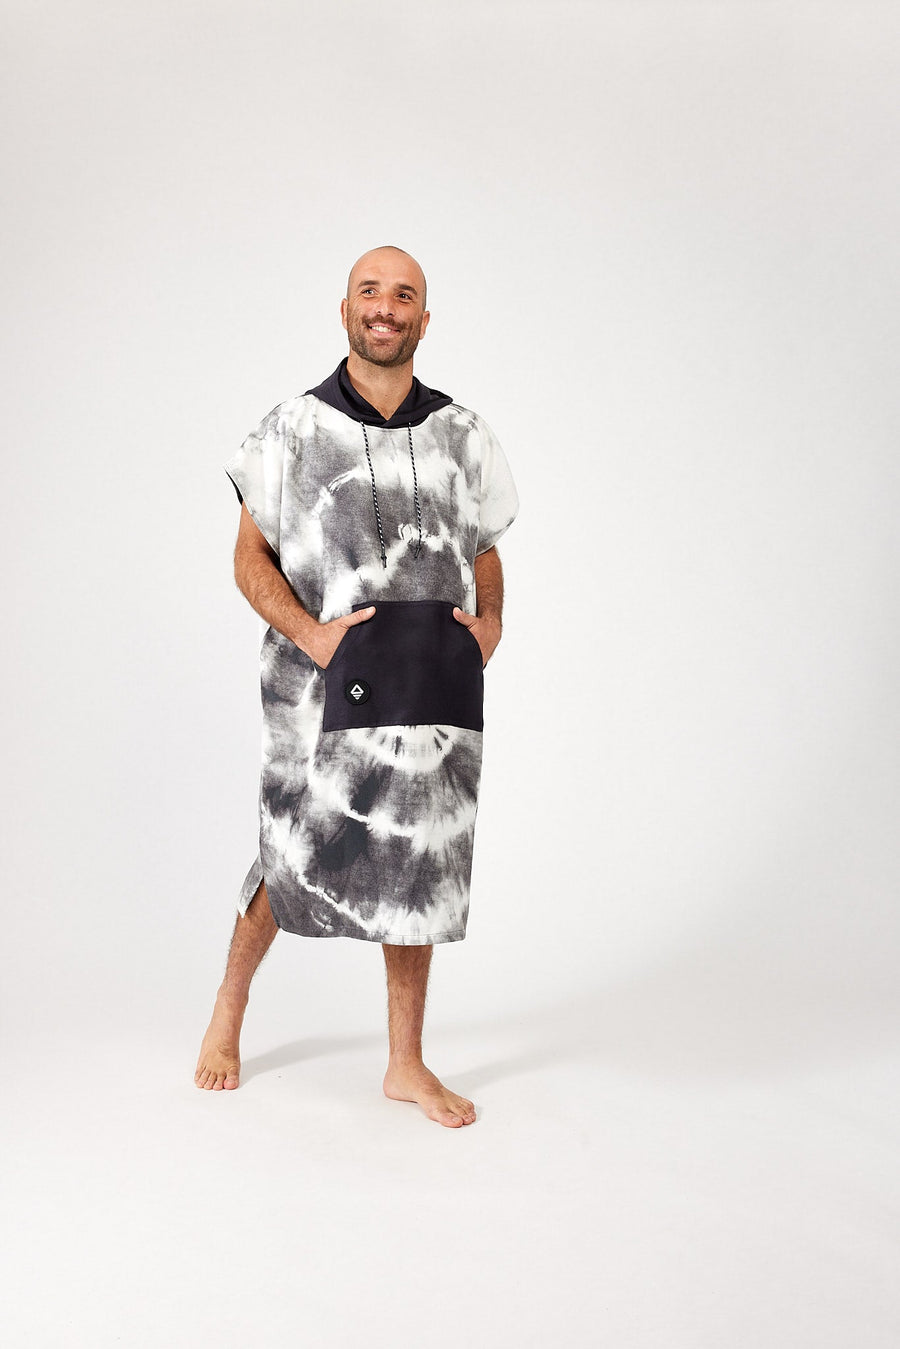 Changing Poncho: Tie-Dye Black and White